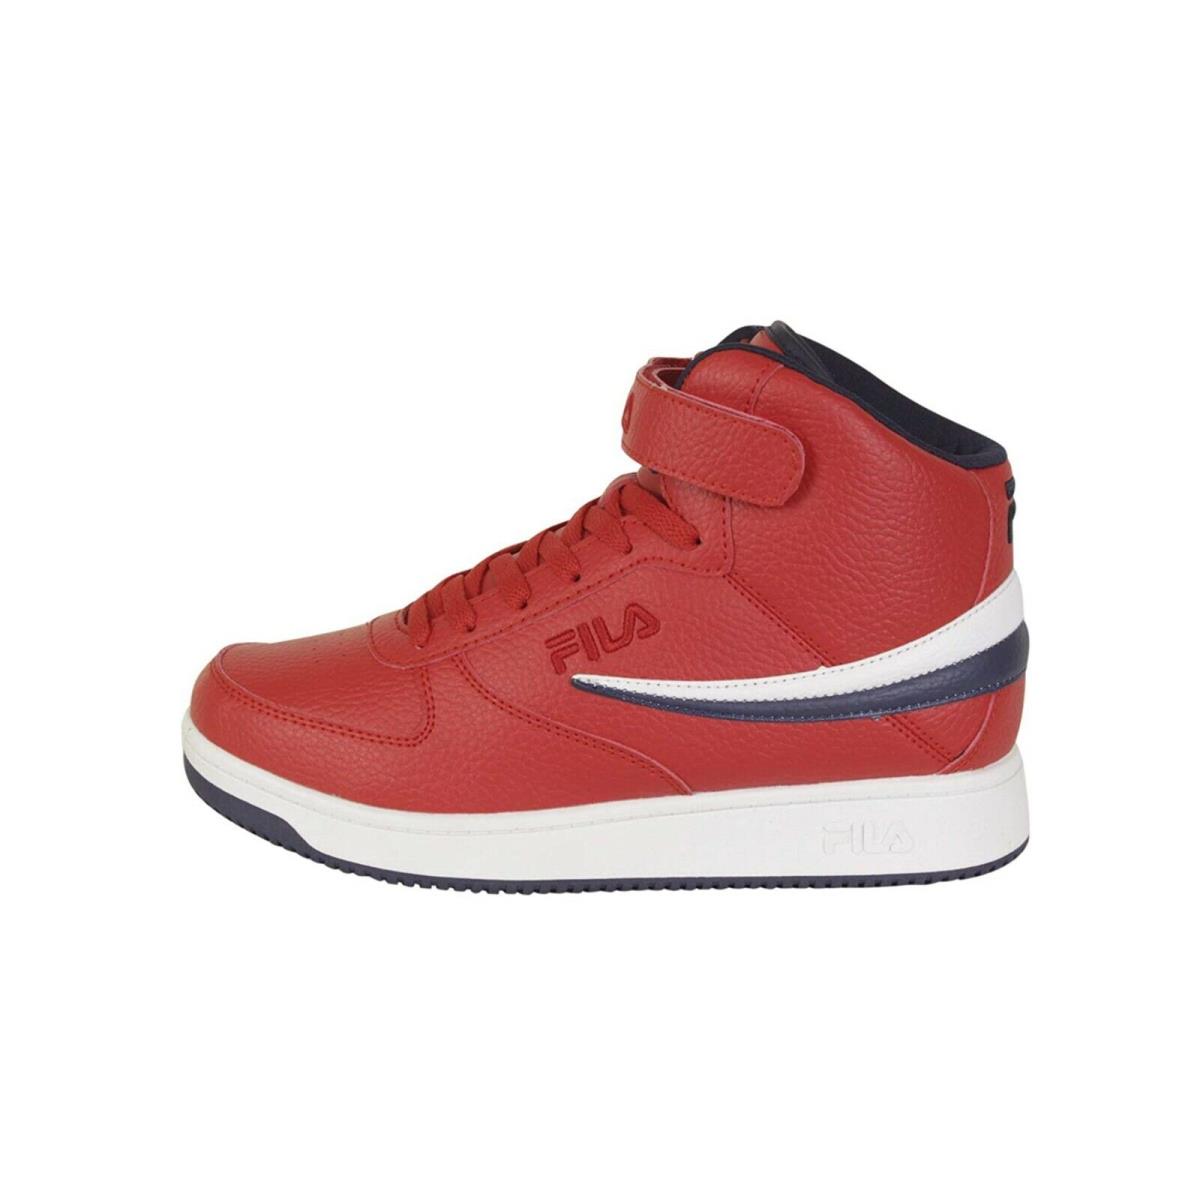 Fila Men A-high Shoes Sneakers Synthetic Leather Red White High Top